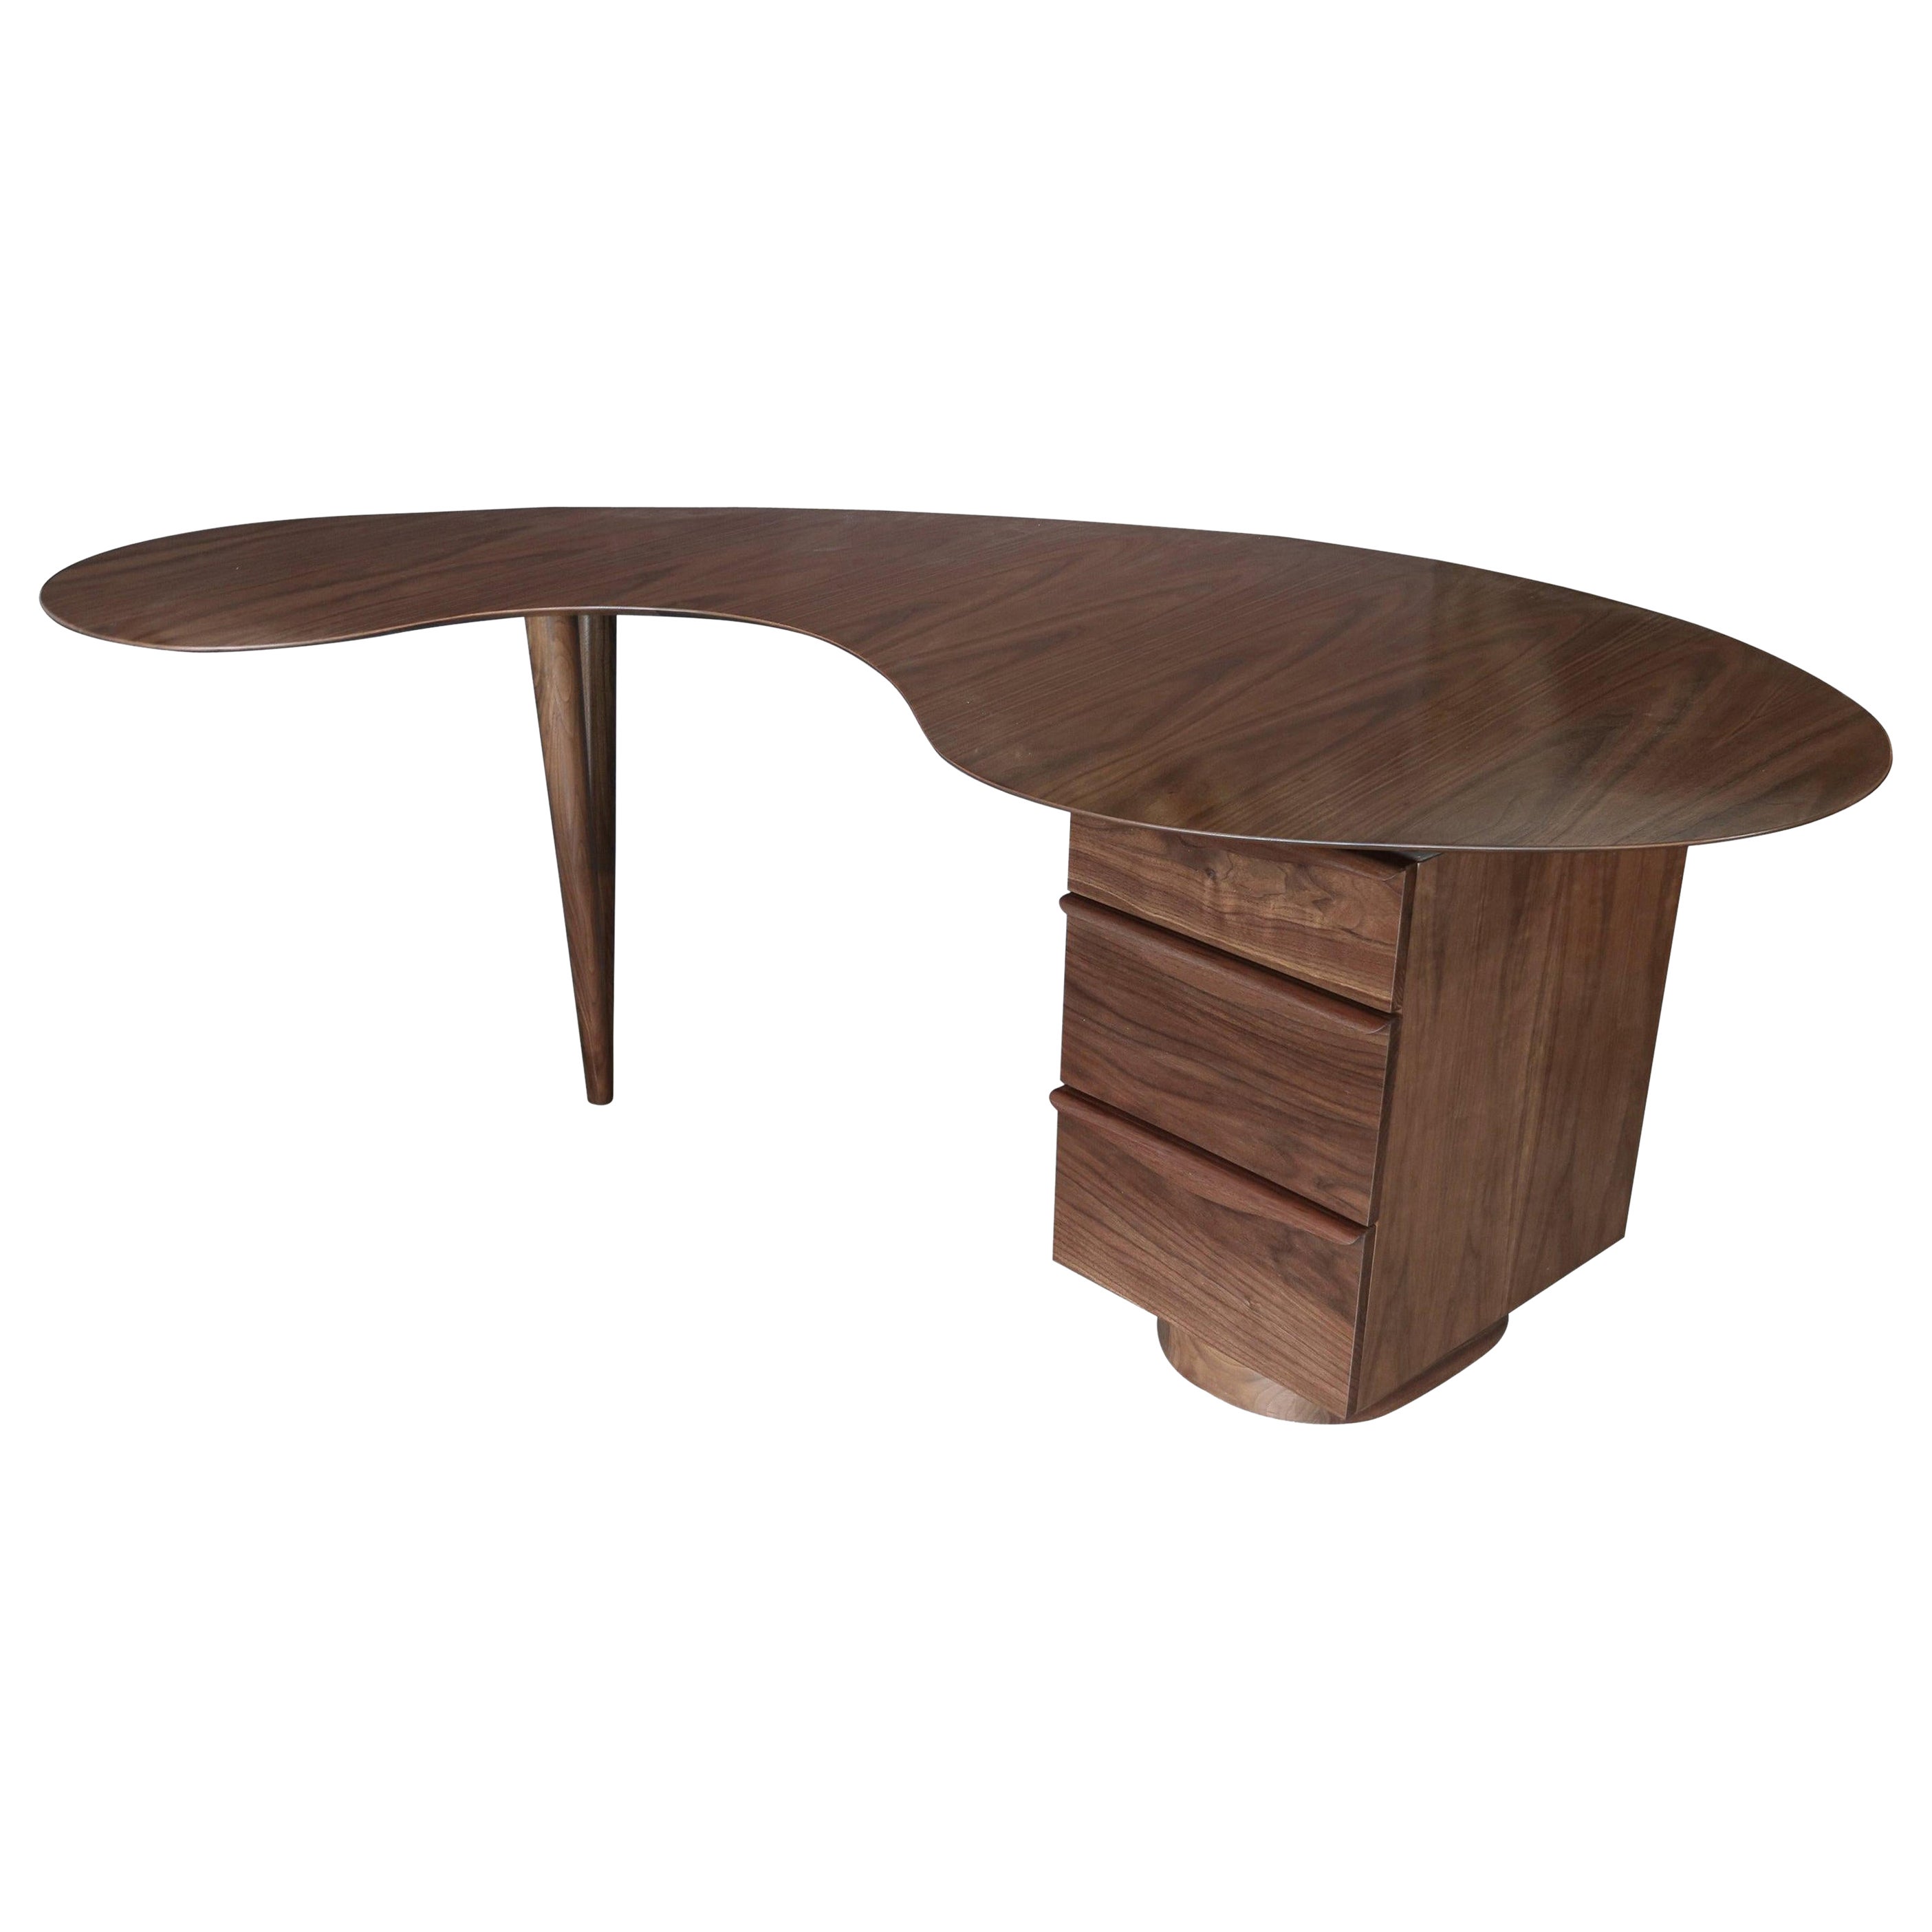 Custom Midcentury Style Curved Walnut Desk by Adesso Imports